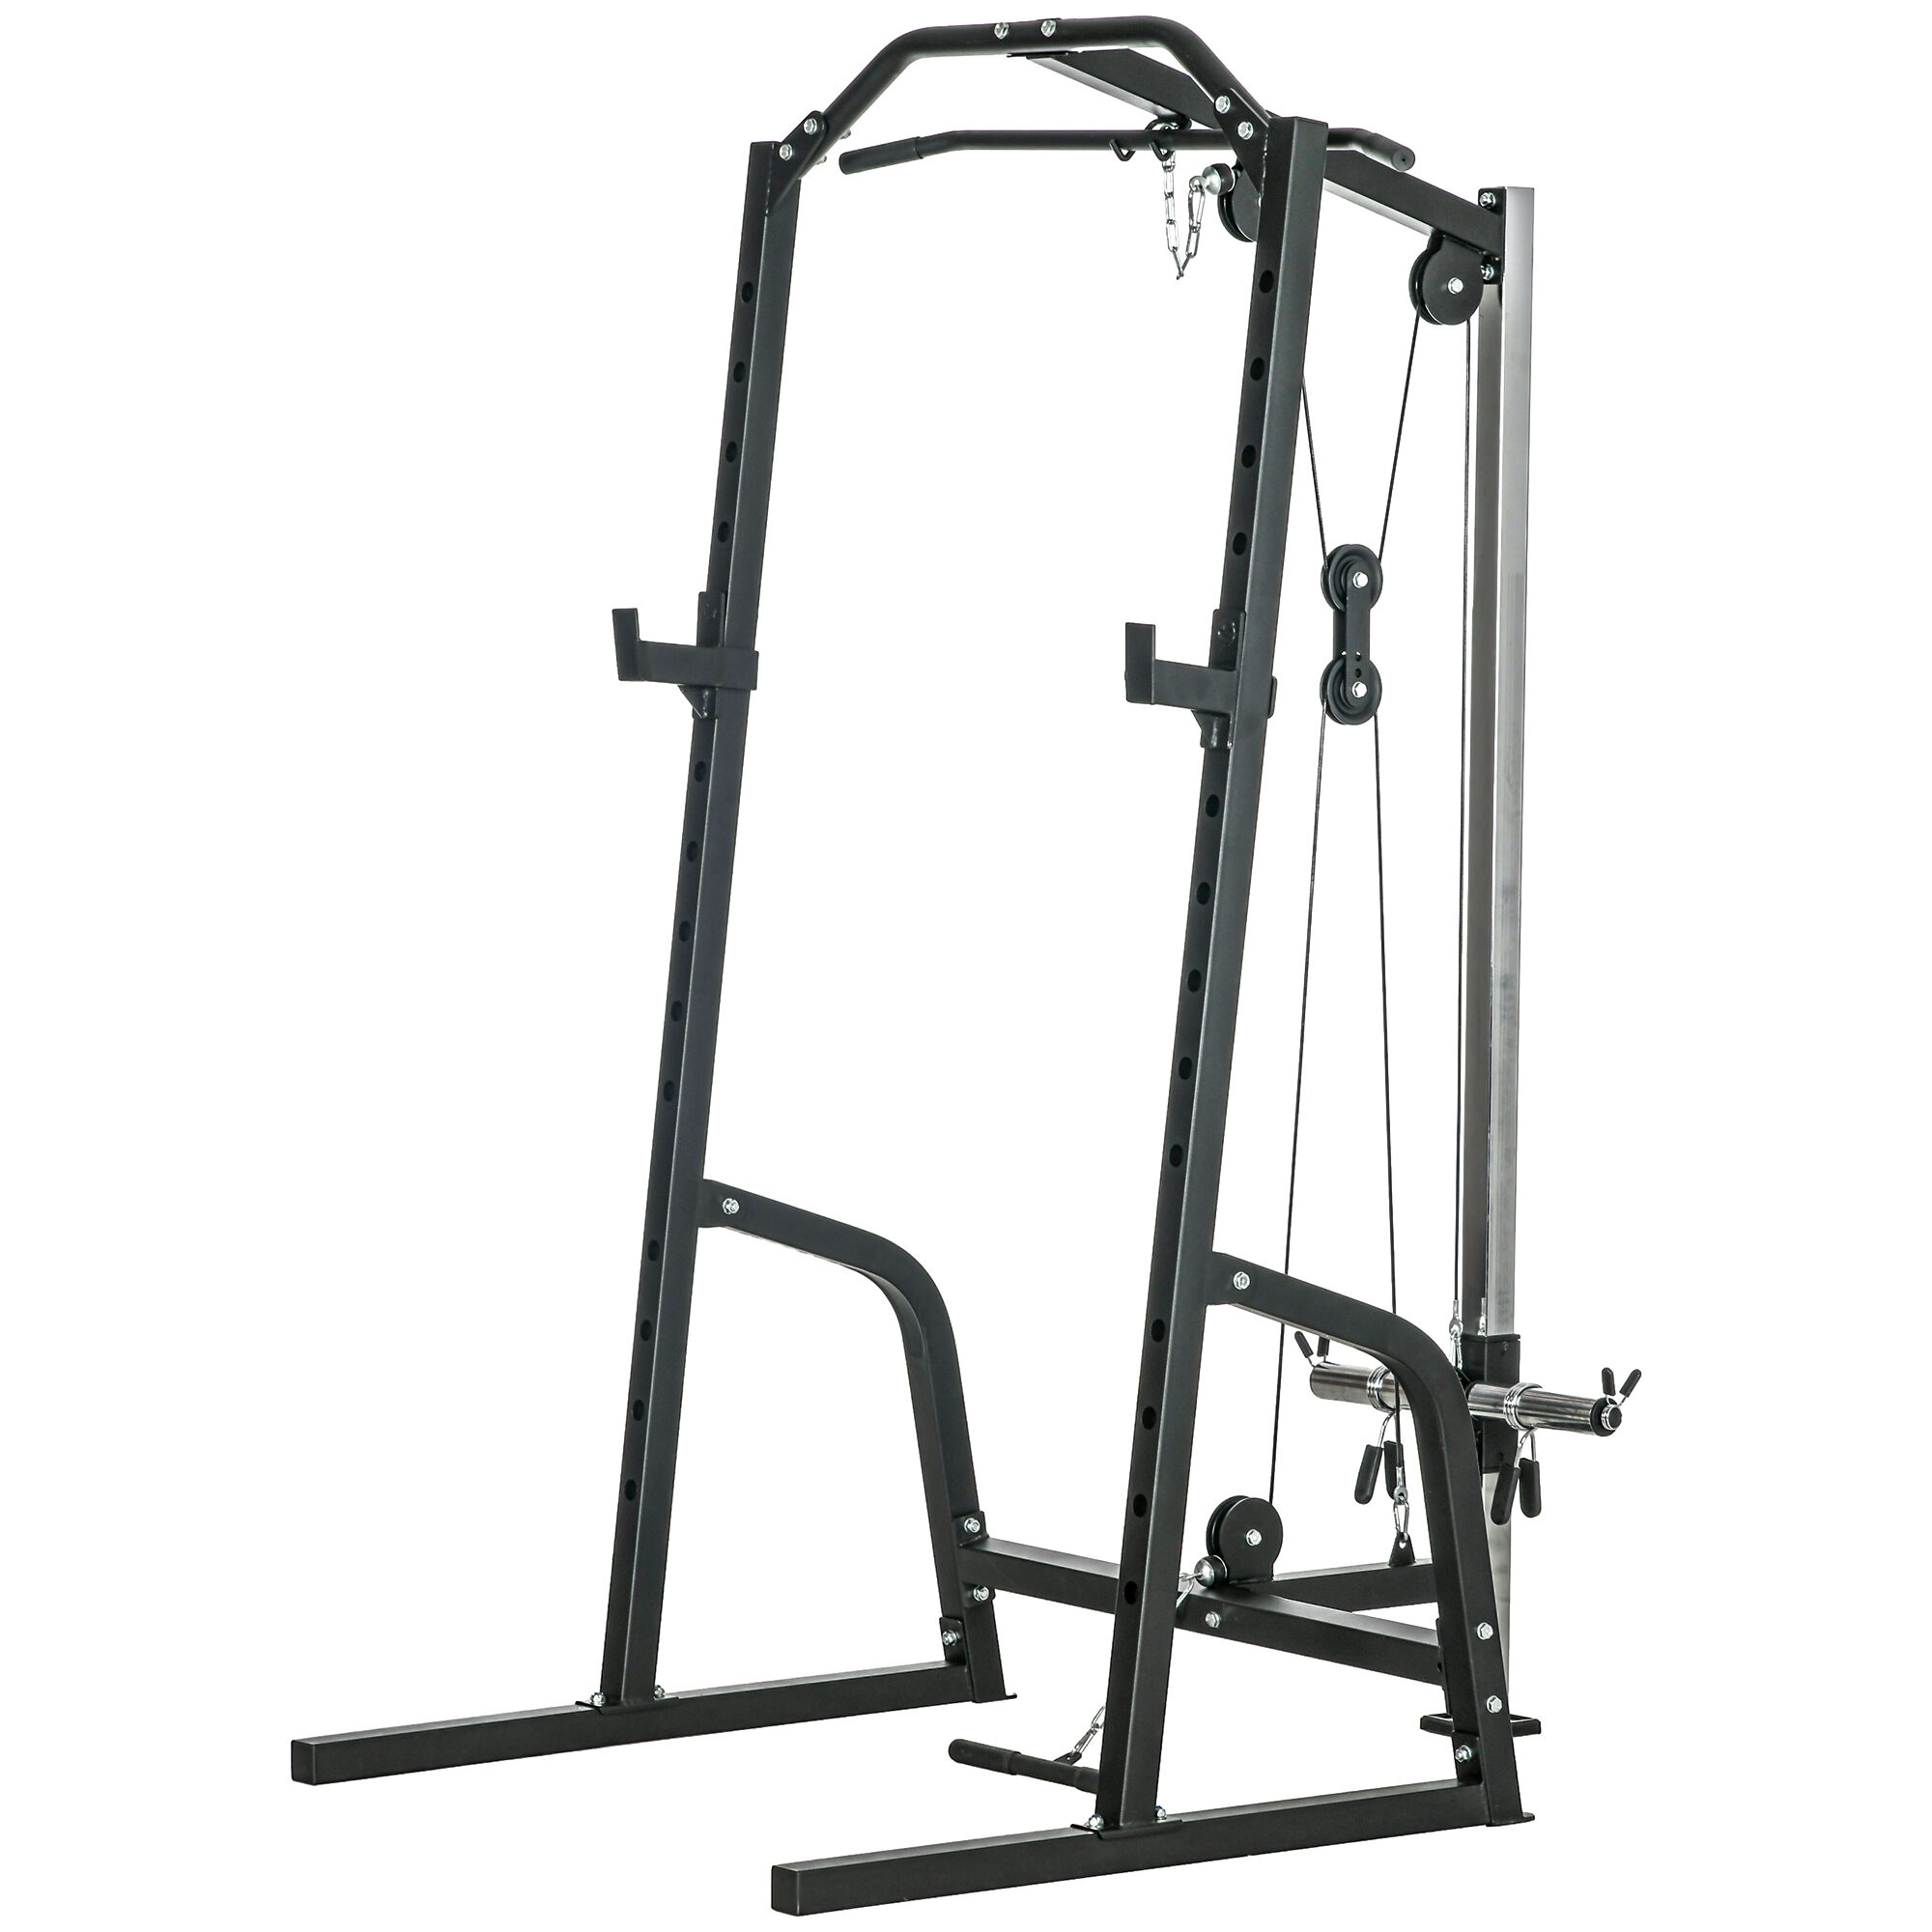 Soozier Power Cage Power Rack with 15-Level Squat Rack, Cable Pulley System, Pull up Stand and Push up Stand